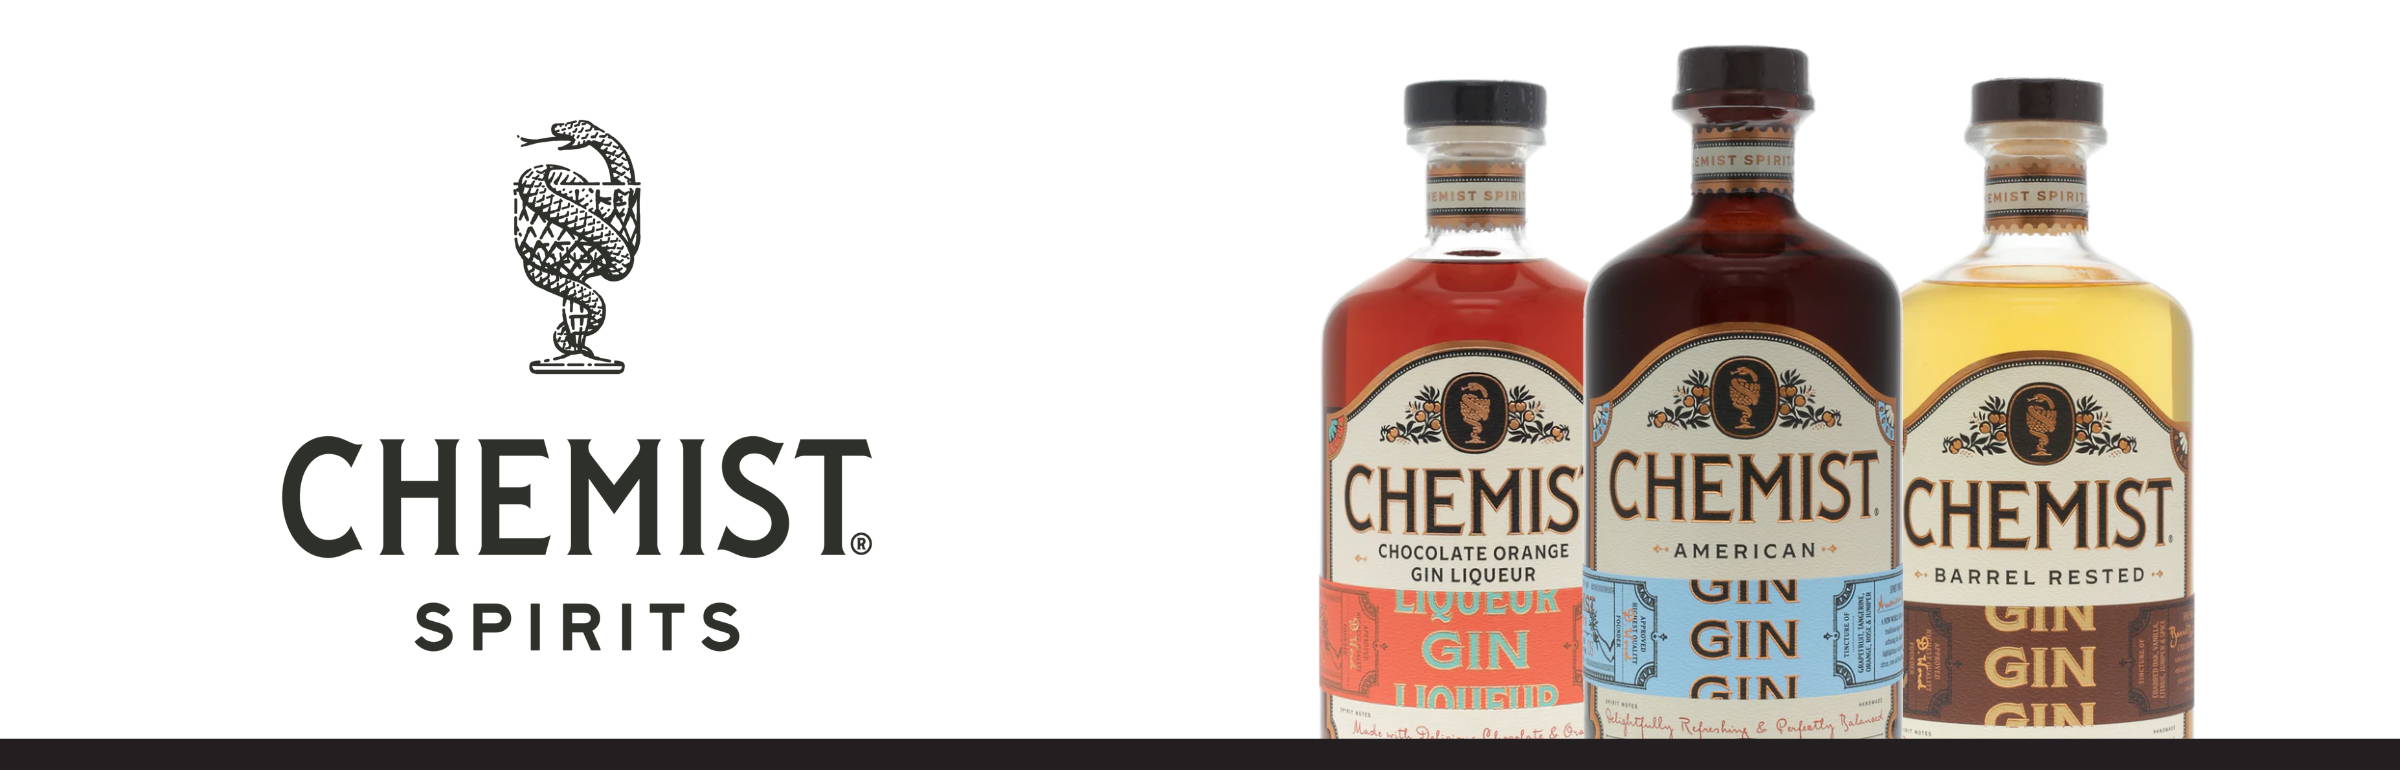 Learn about Chemist Spirits of Asheville, North Carolina